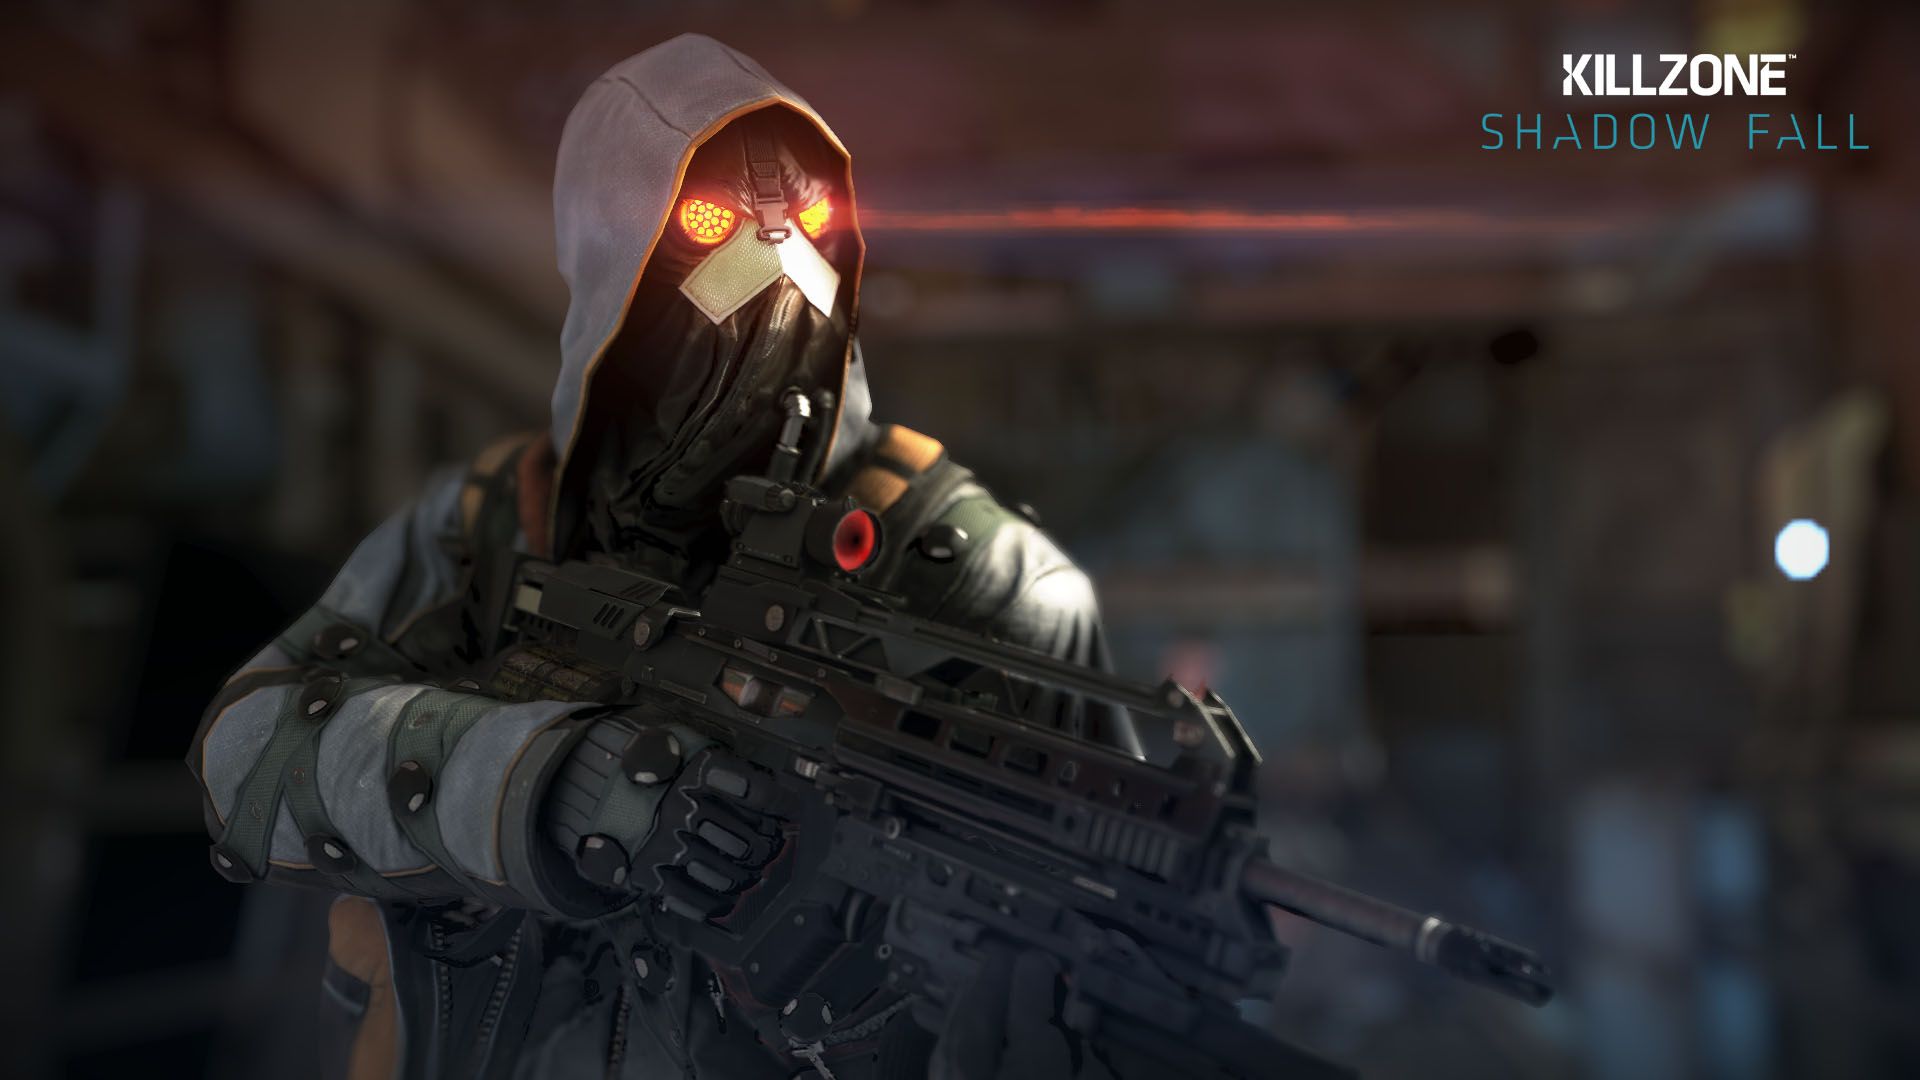 tgs-2013-check-out-four-gameplay-videos-of-killzone-shadow-fall-including-one-recorded-at-60-fps